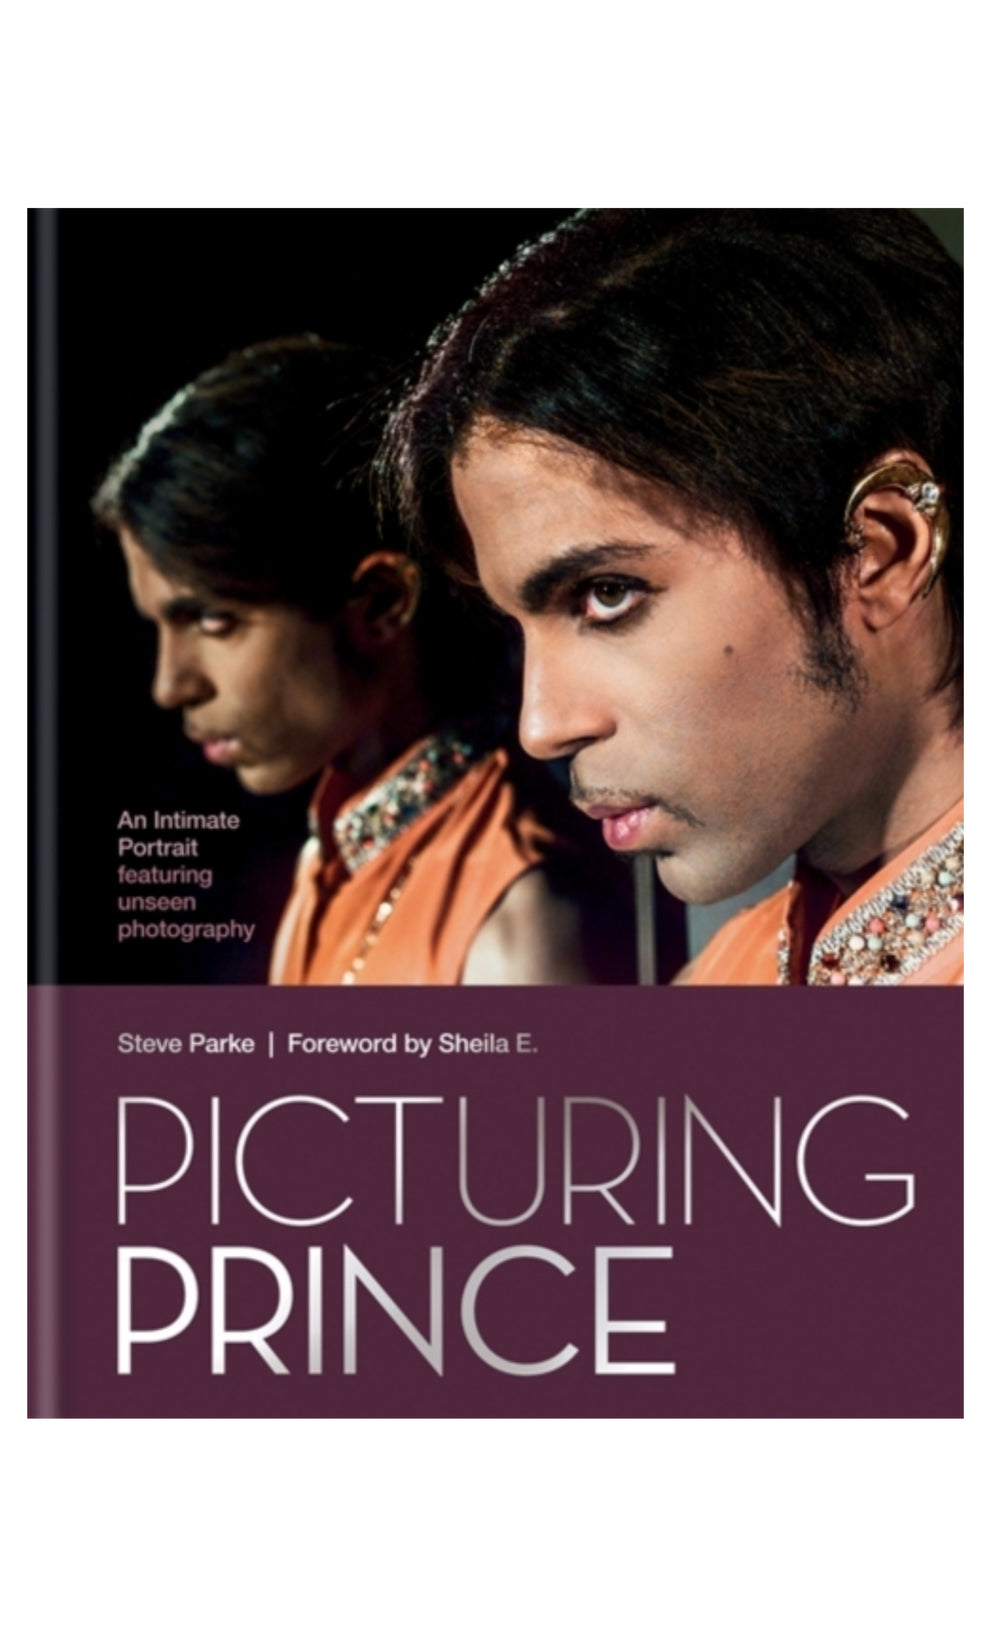 Prince – Picturing Prince : An Intimate Portrait by Steve Parke Hardback Book SIGNED